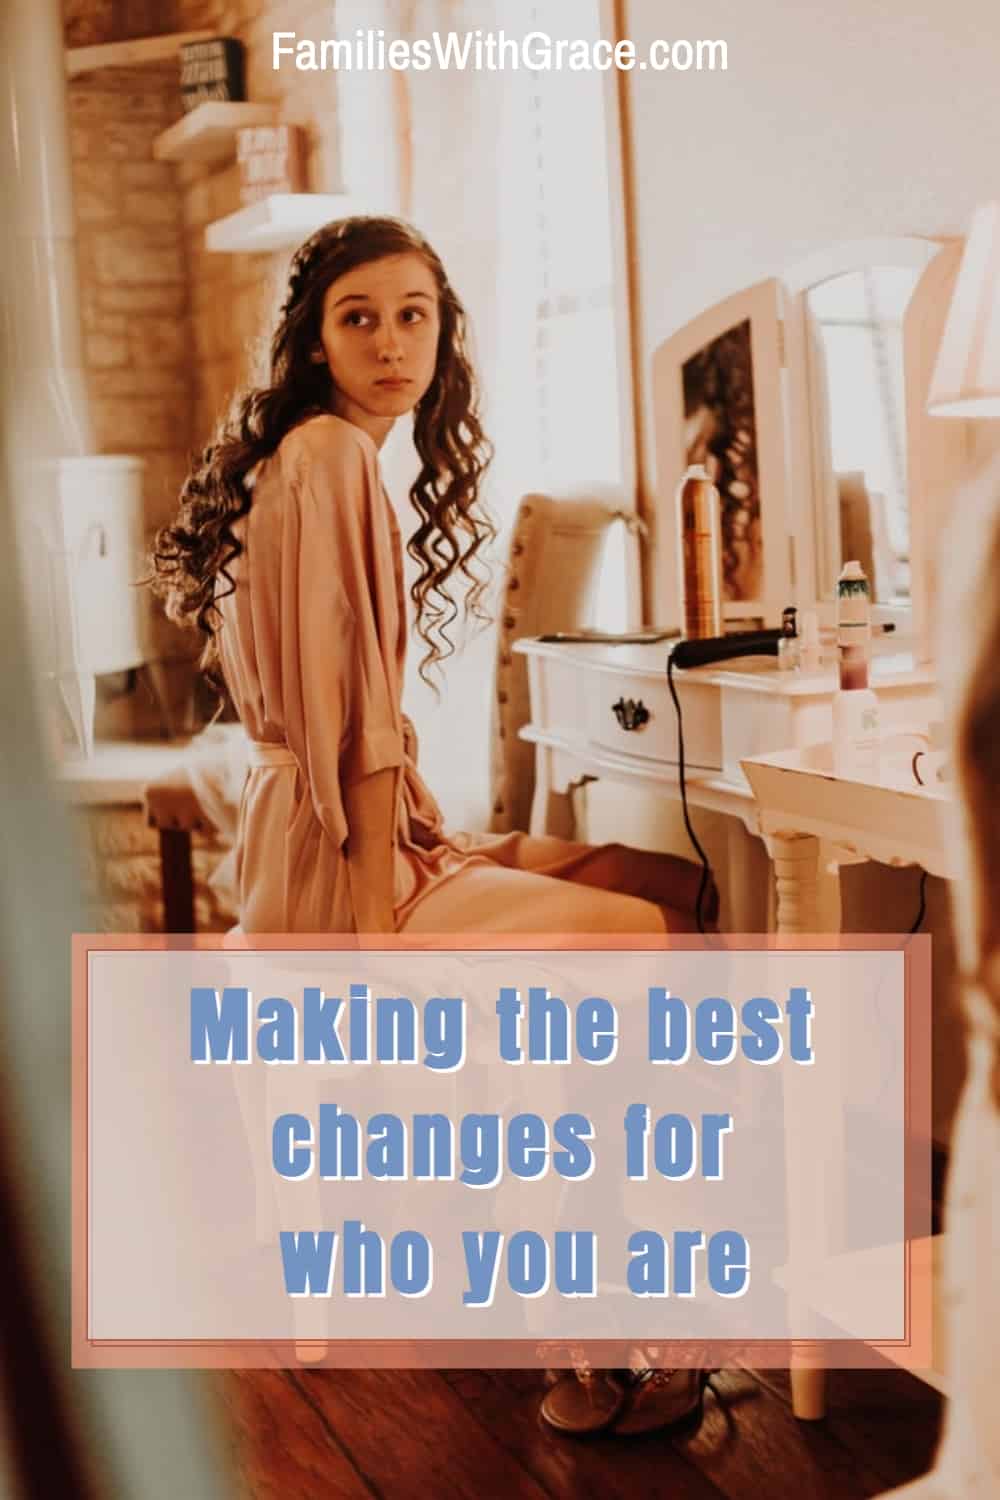 Making the best changes for who you are